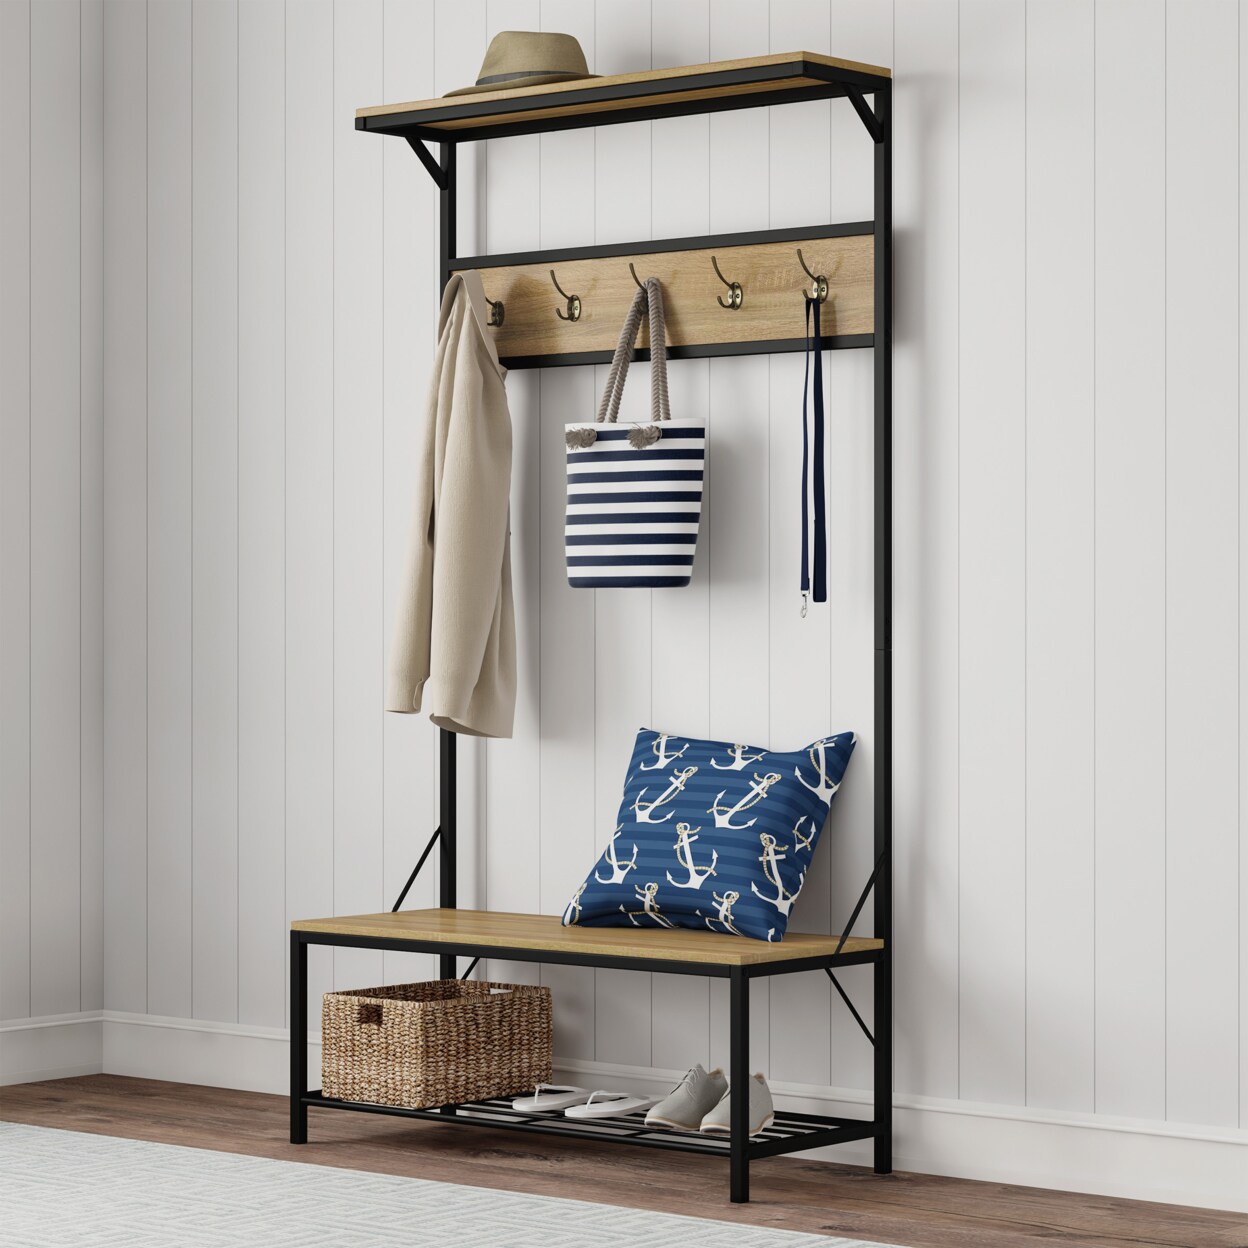 Metal Shoe Rack Bench for Entryway, Entry Bench with Shoe Storage